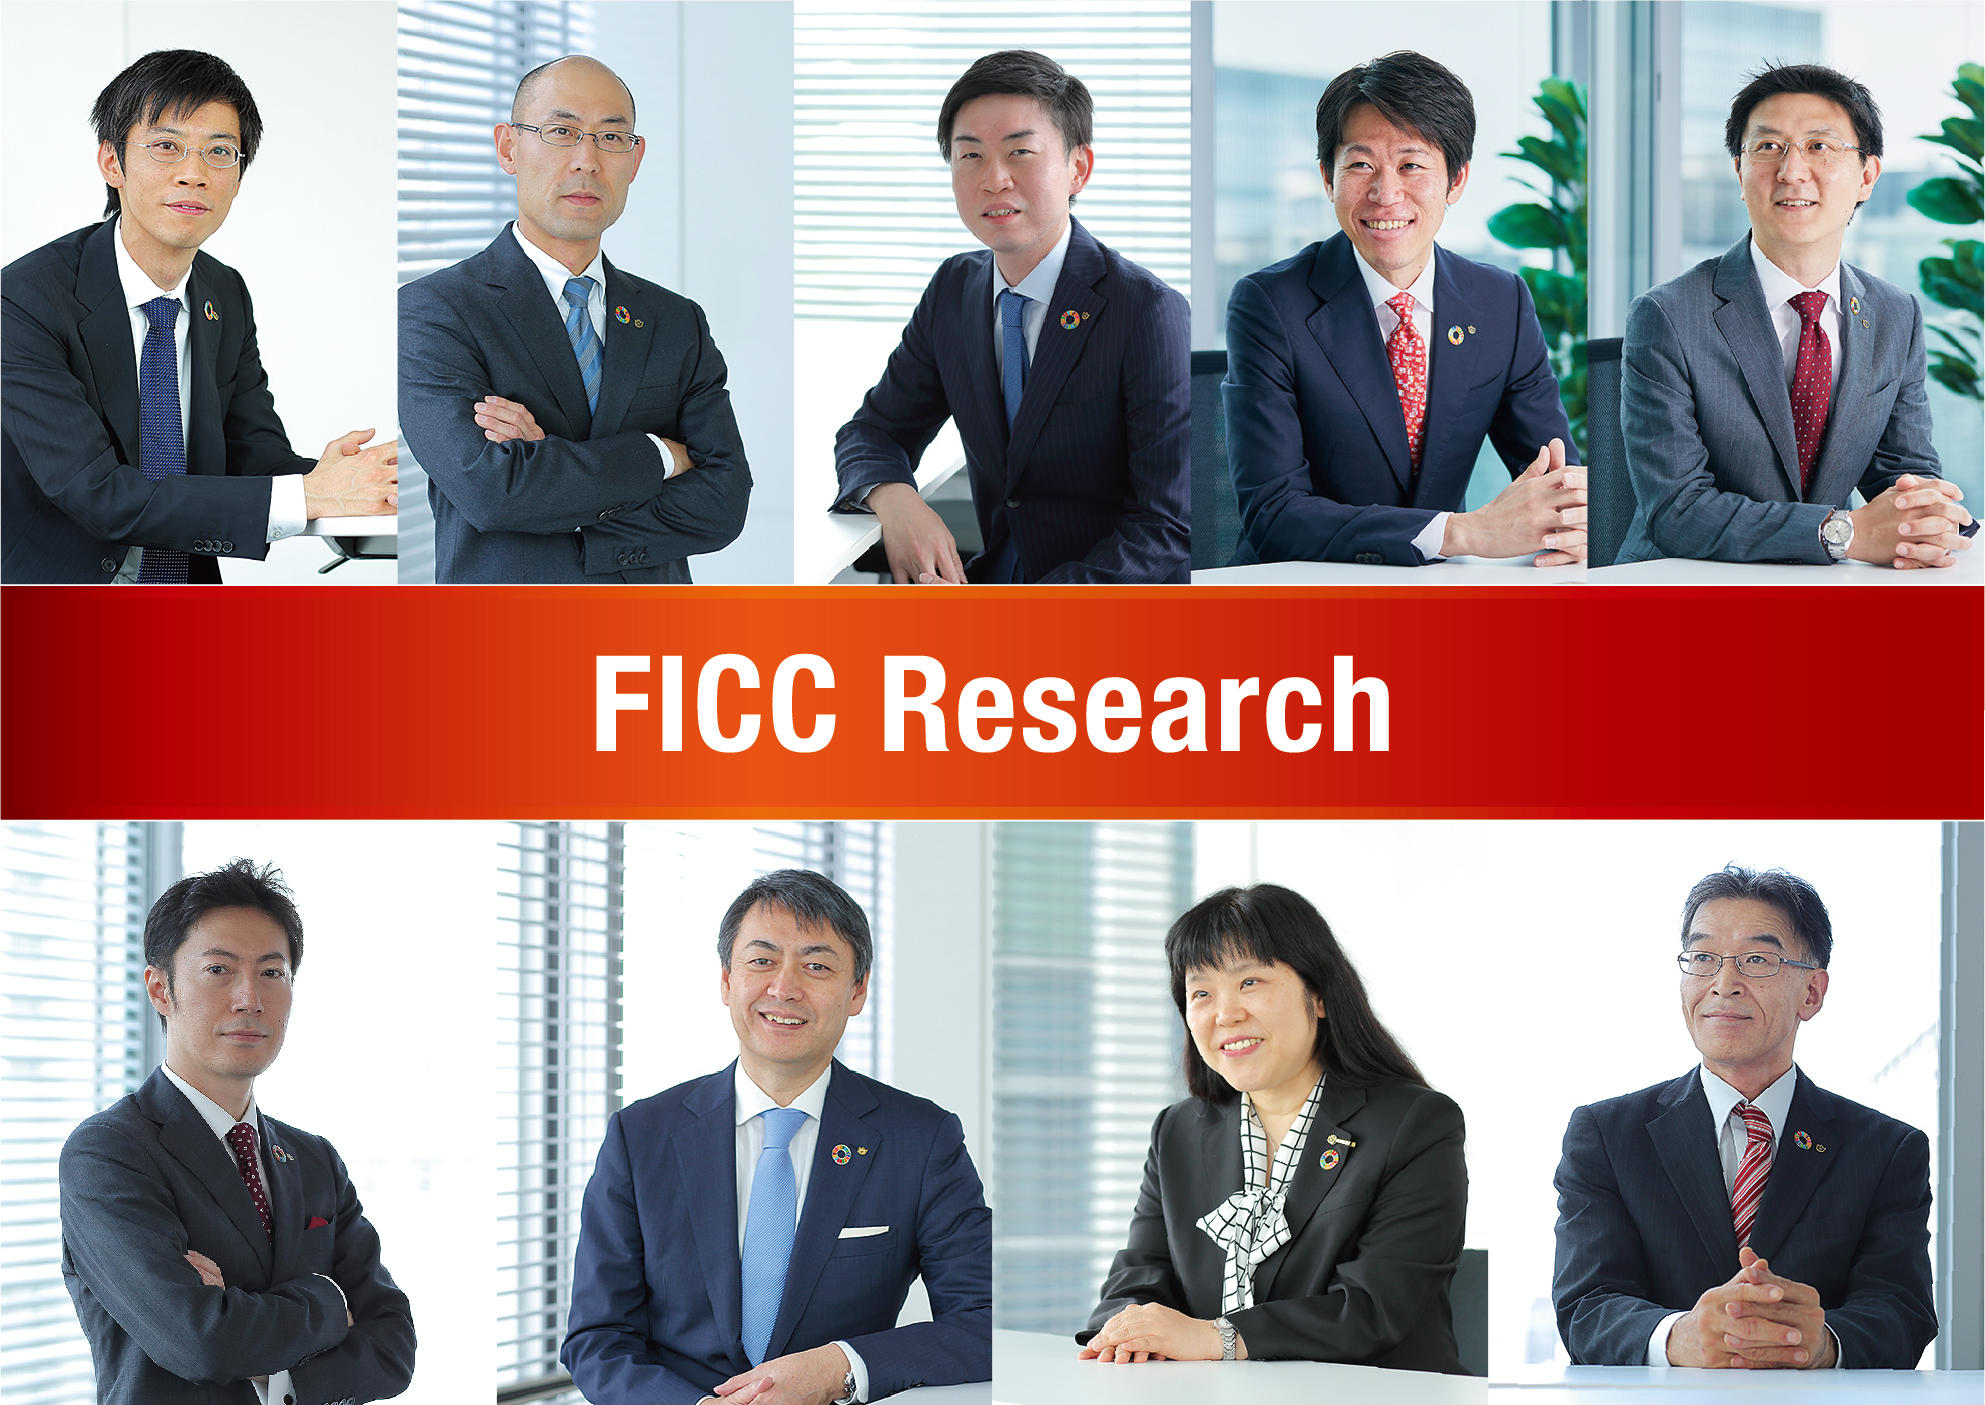 No.1 in Nikkei Veritas analysts rankings for the first time (FICC Research)